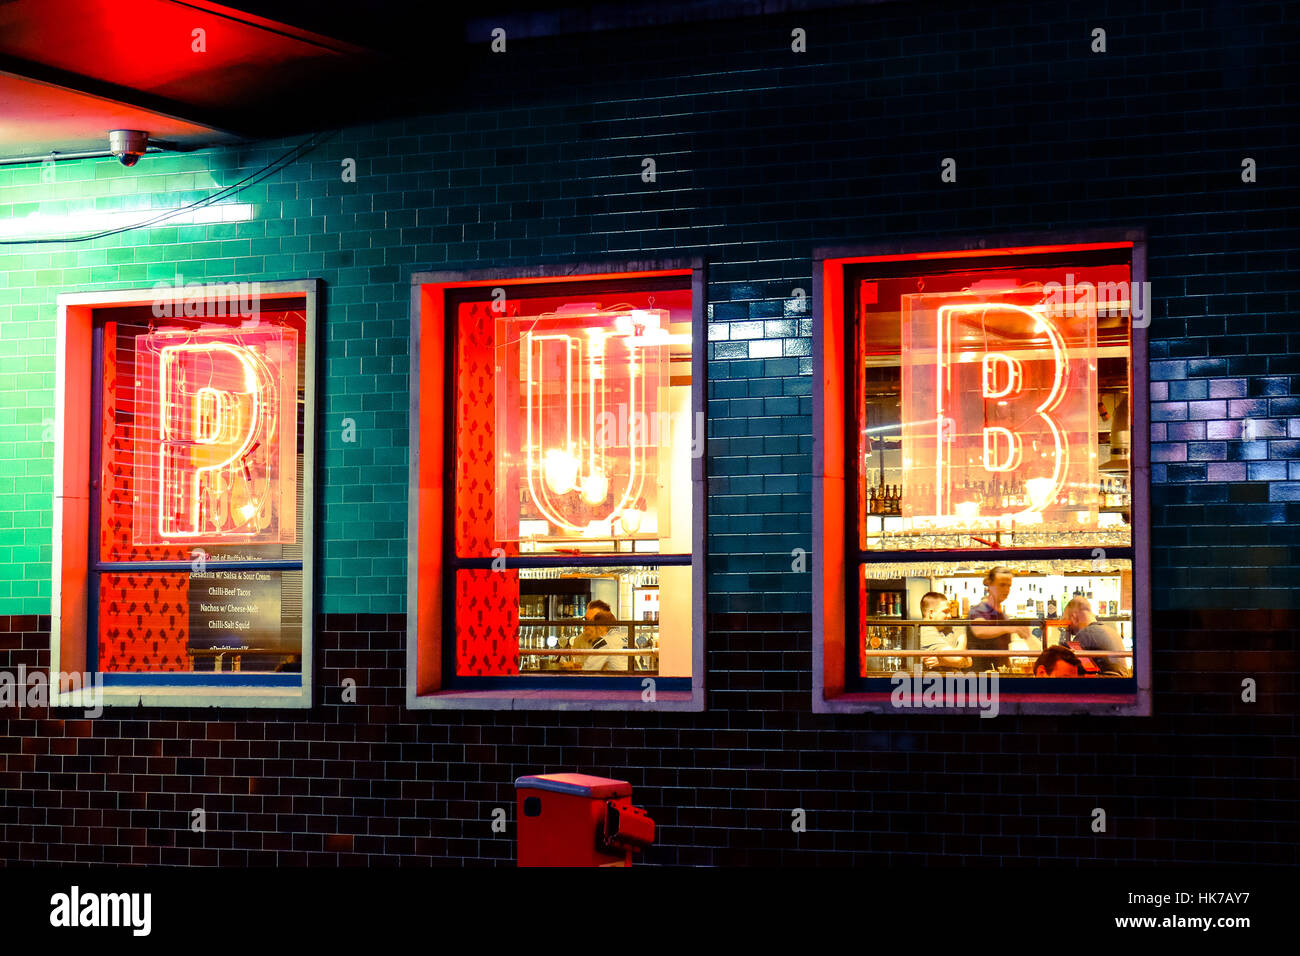 Neon signs shine in the windows of a bar Stock Photo